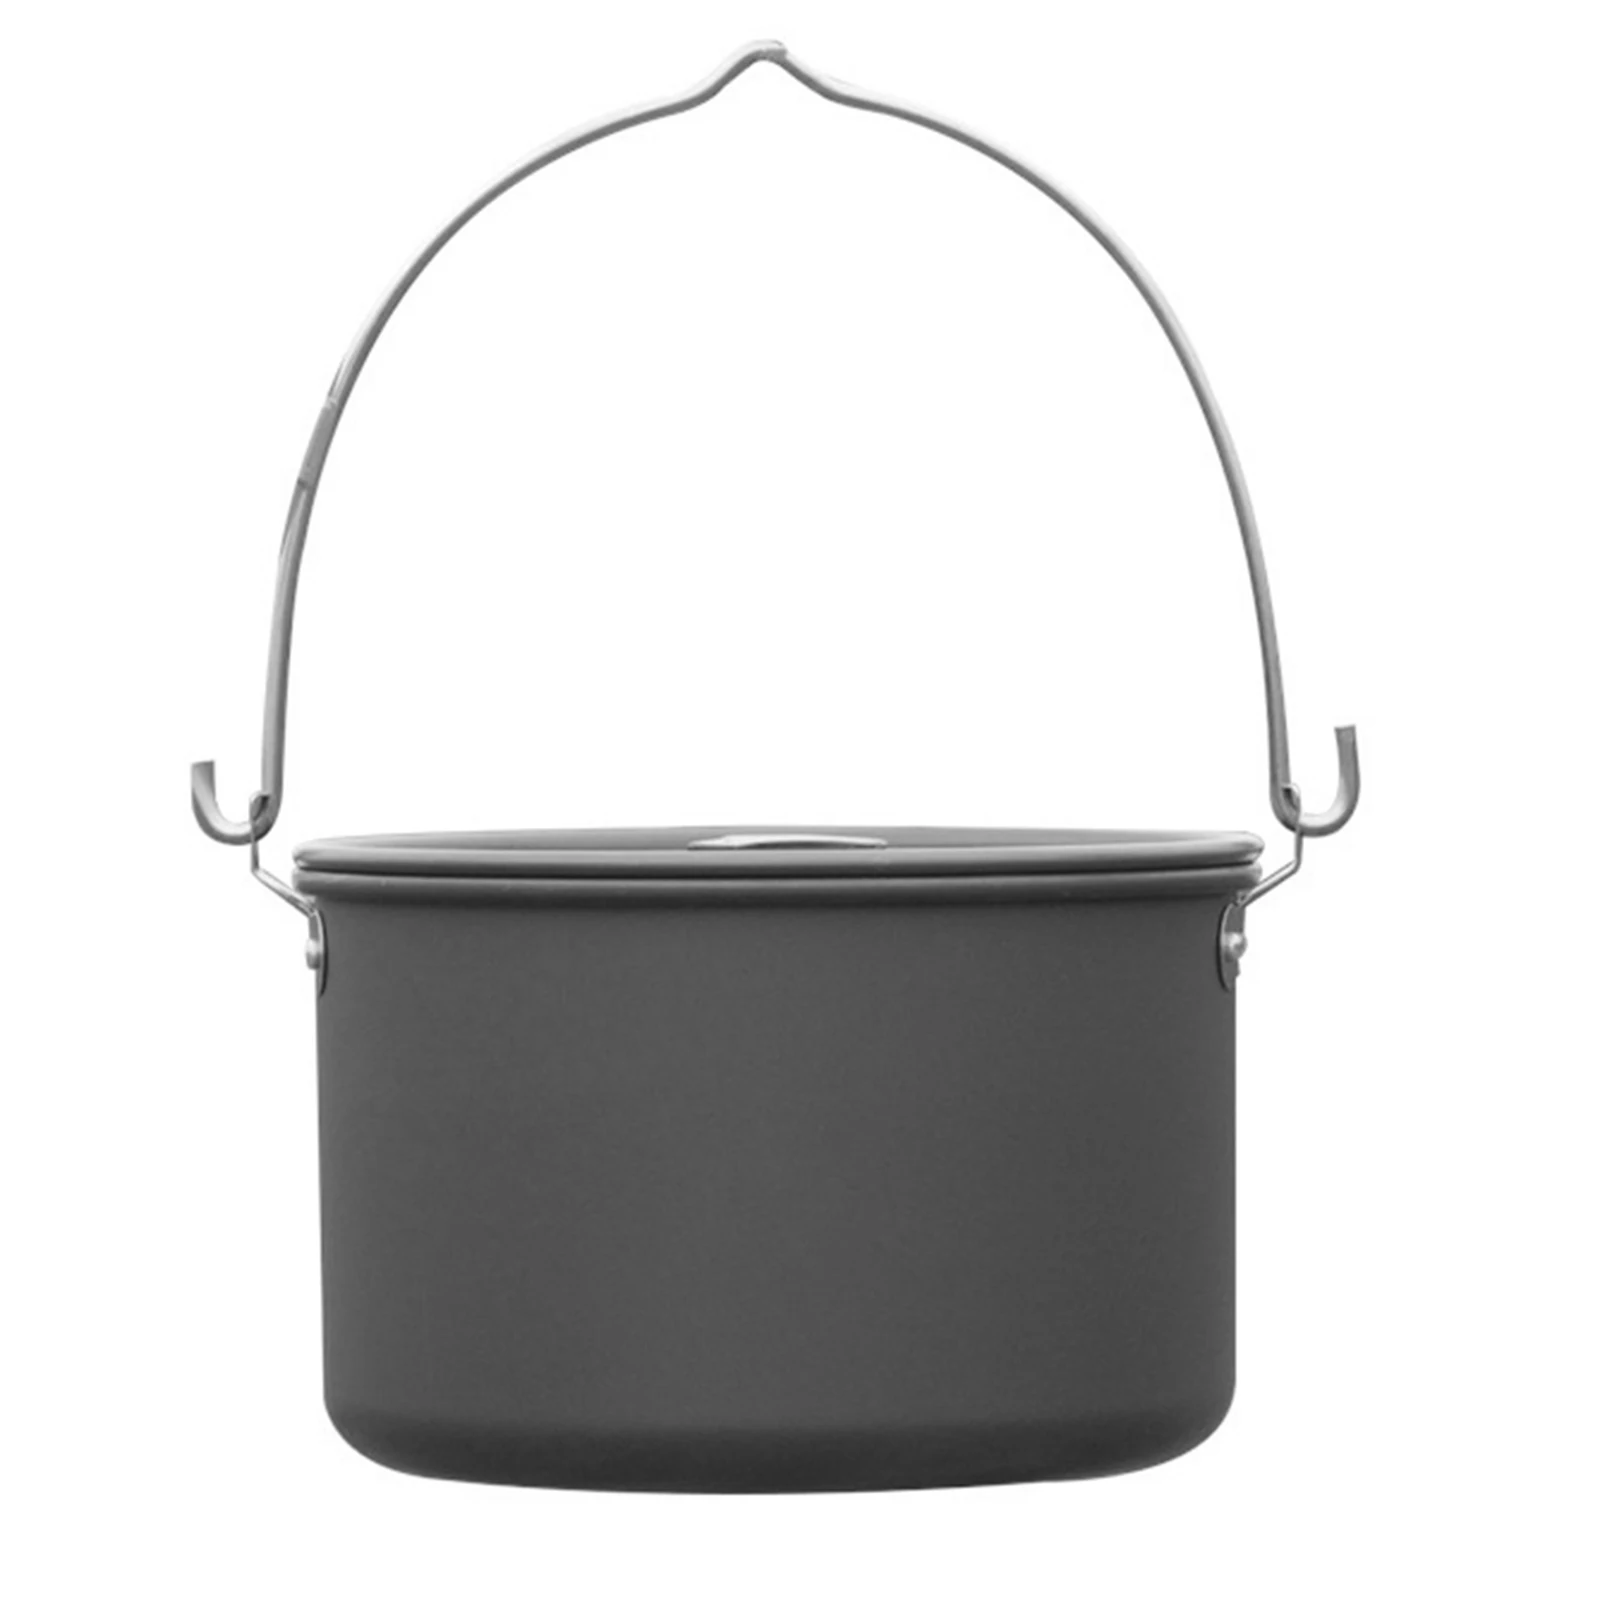 

Camping Pot 4.5L/4-Quart Hanging Cooking Pot With Lid Cookware For Outdoor Camping Hiking Fishing Outdoor Camping Pan